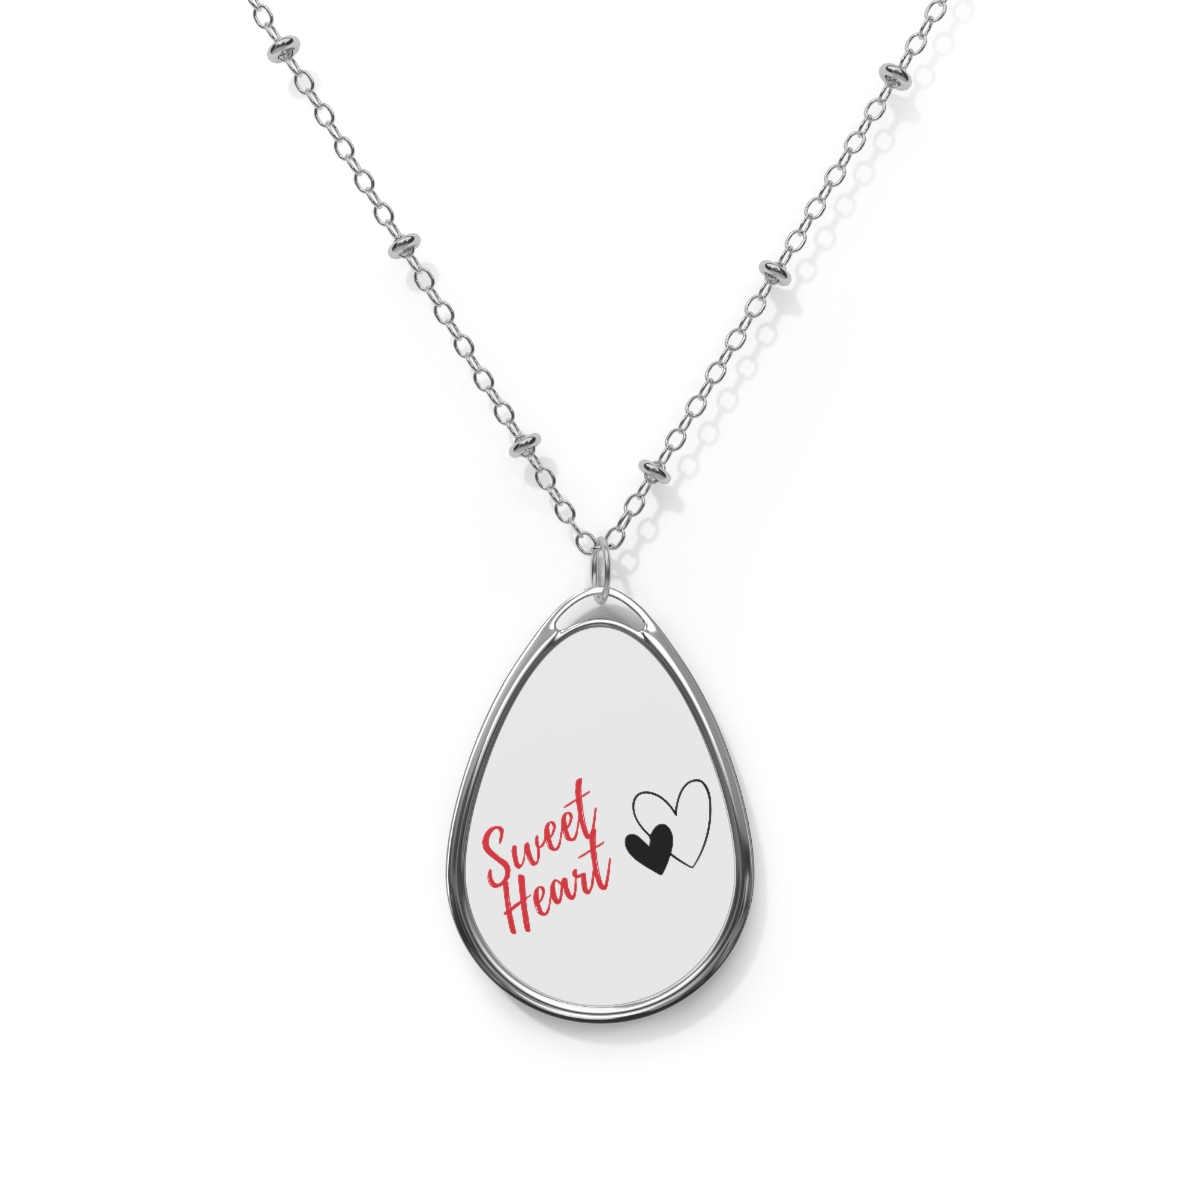 Custom Oval Necklace with Name, Picture or Monogram